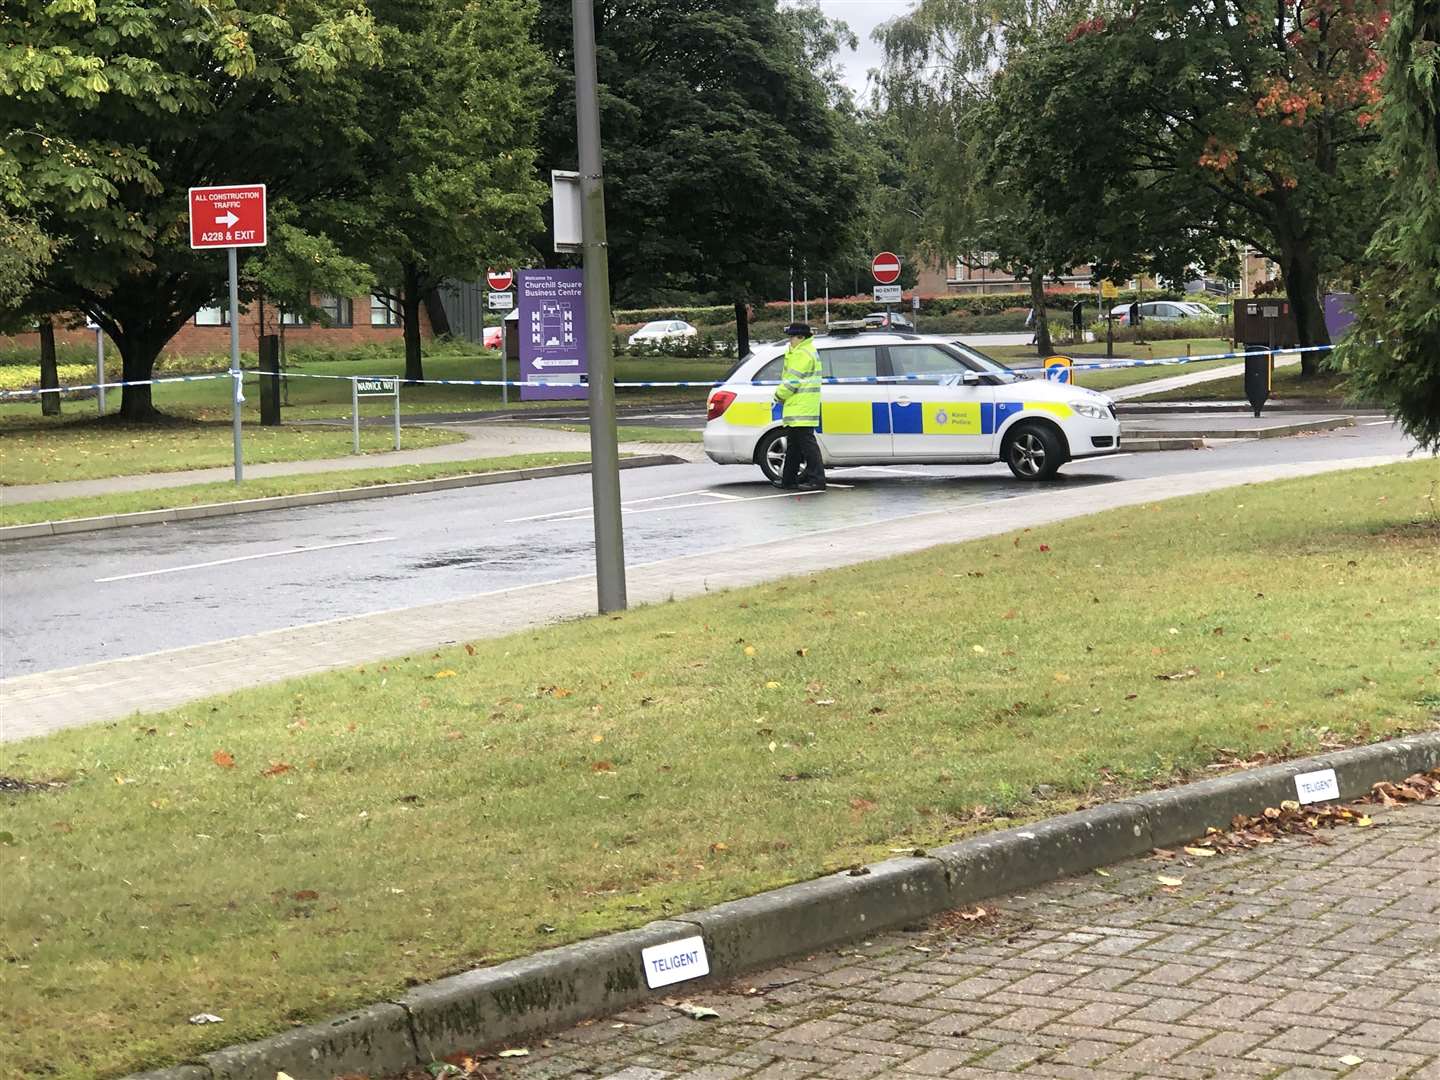 Police put a cordon in place in Kings Hill